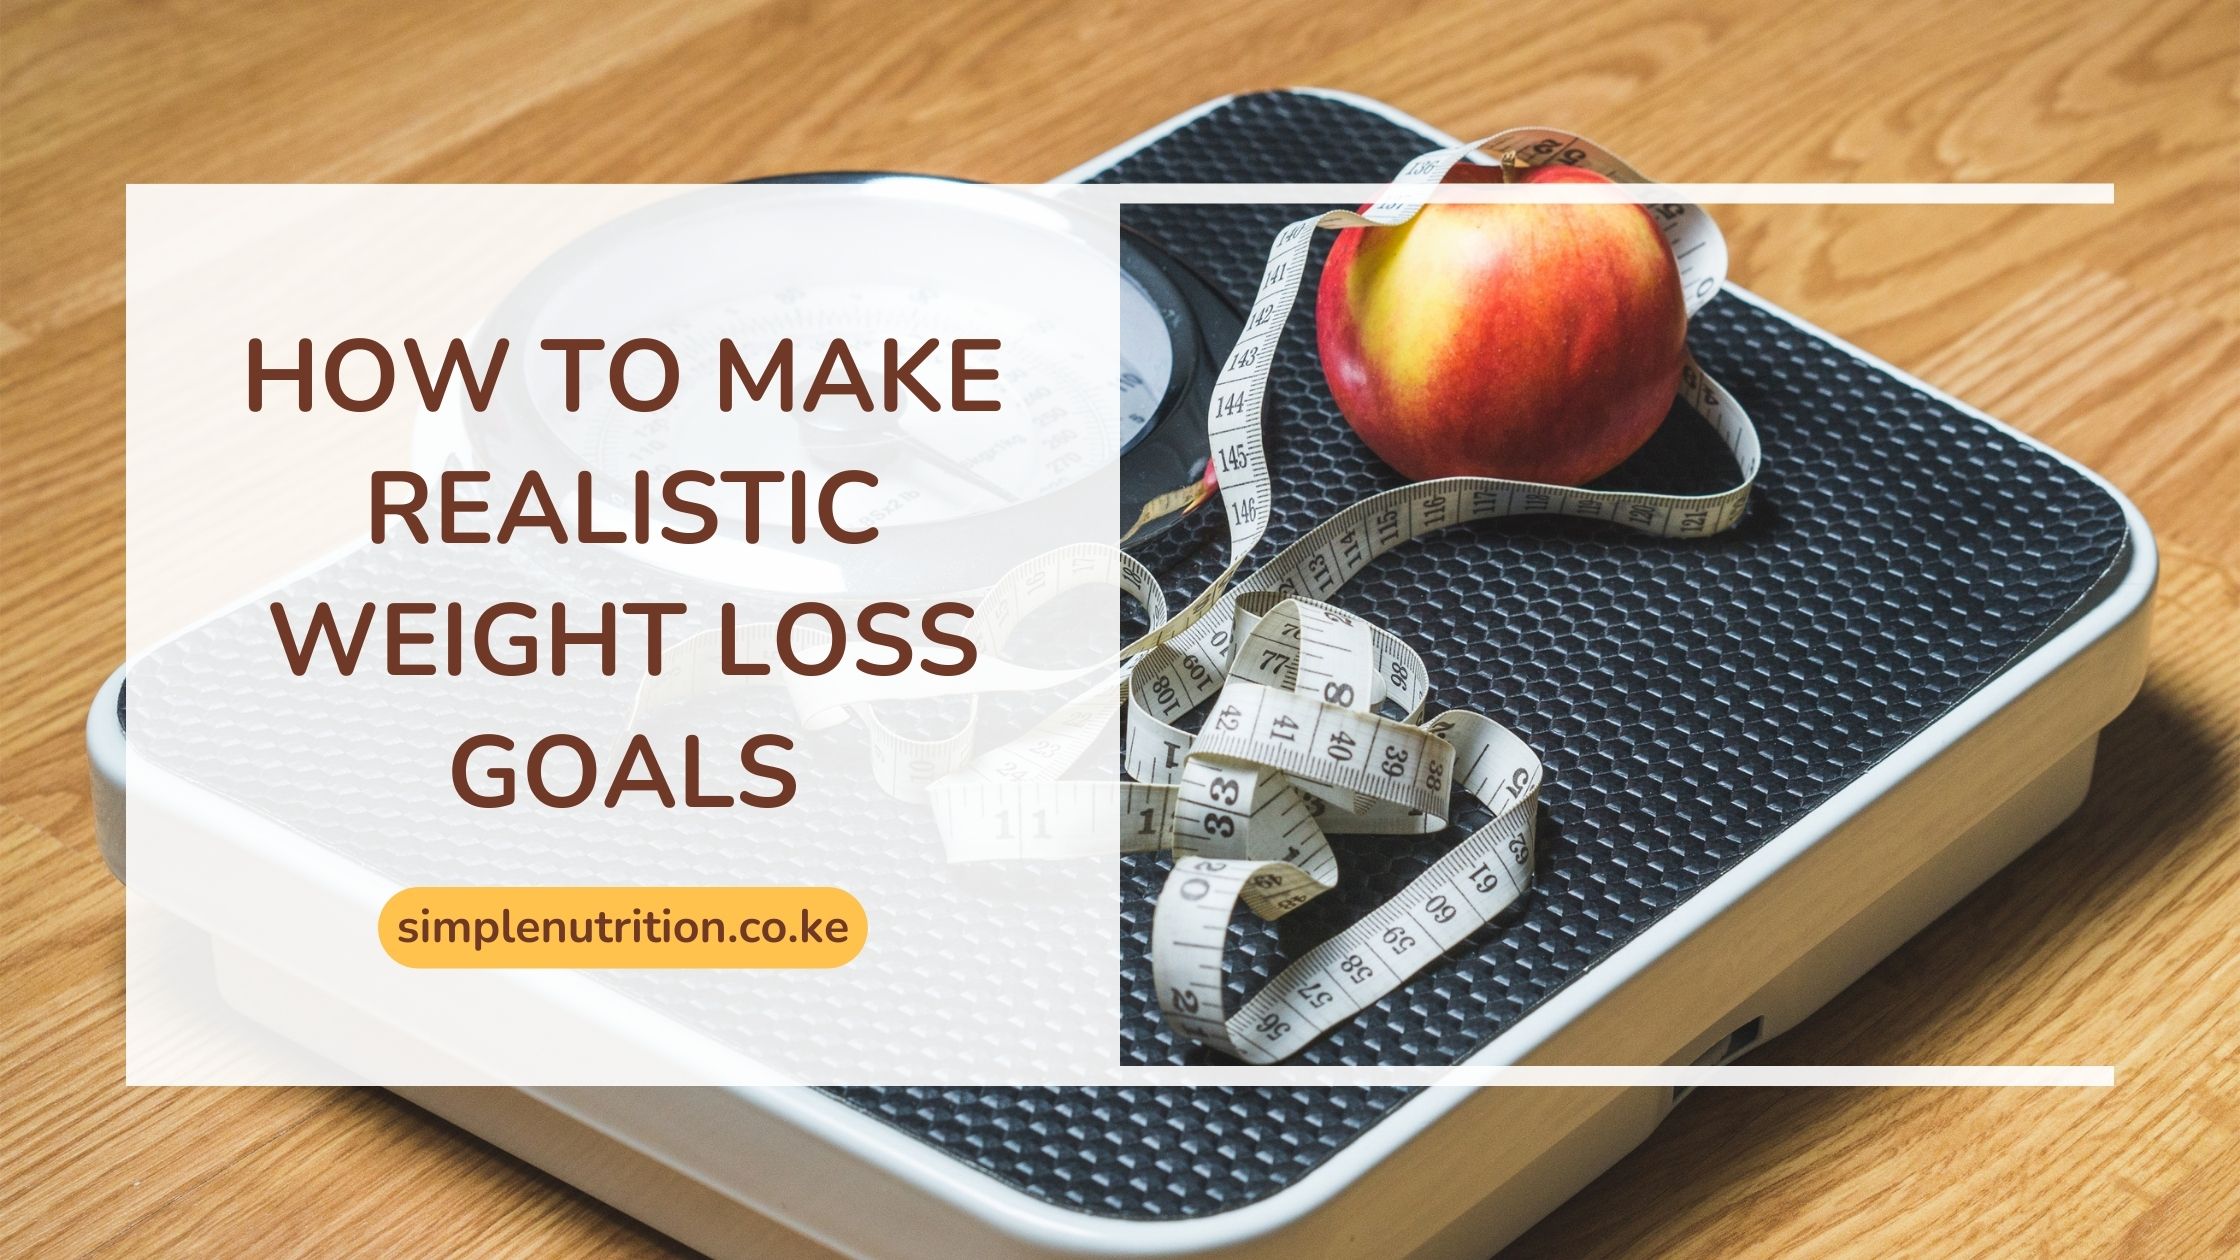 How to Make Realistic Weight Loss Goals